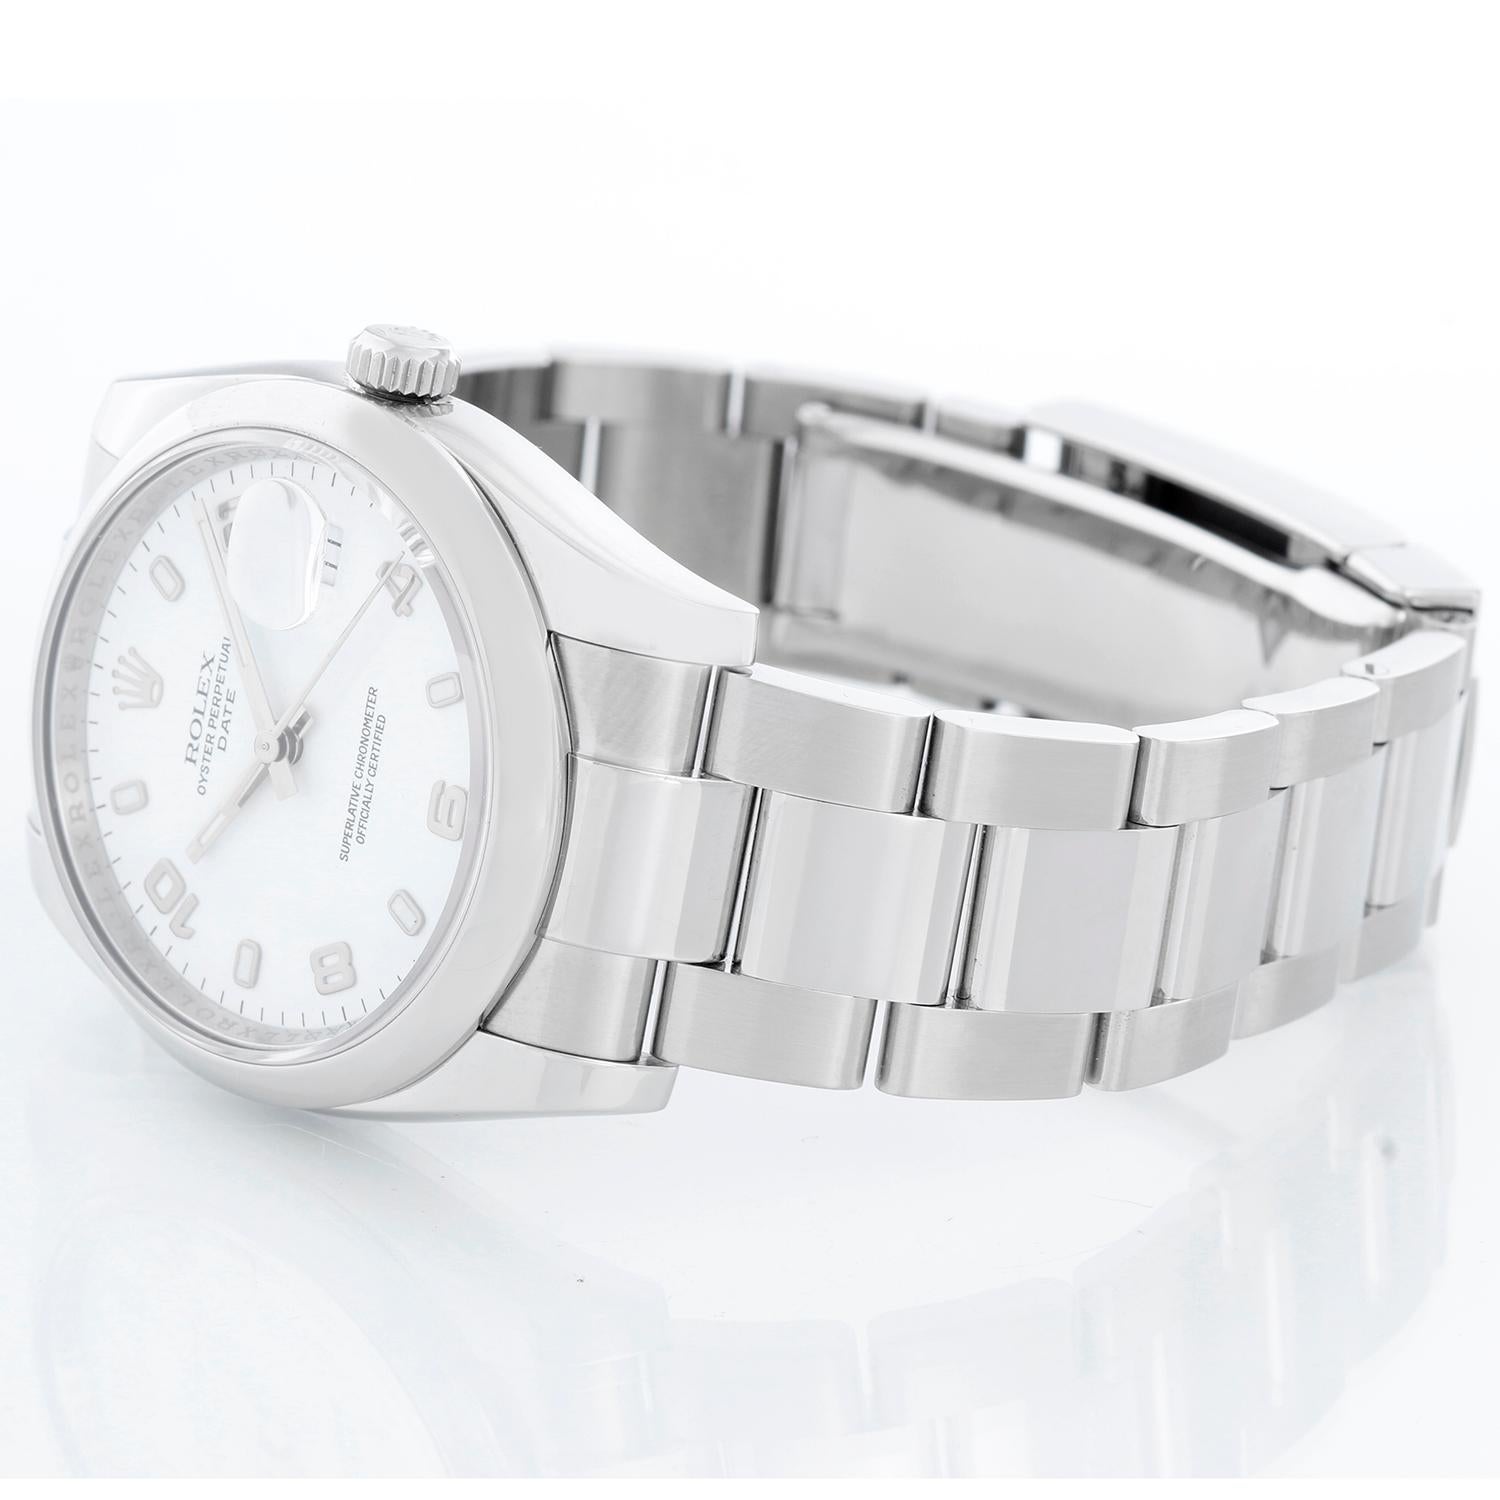 Rolex Date Oyster Perpetual Men's Watch 115200 - 115200. Stainless Steel ( 34 mm ) Smooth bezel. White dial with luminous hour markers. Oyster bracelet with deployant buckle. Pre-owned with Rolex box and book
